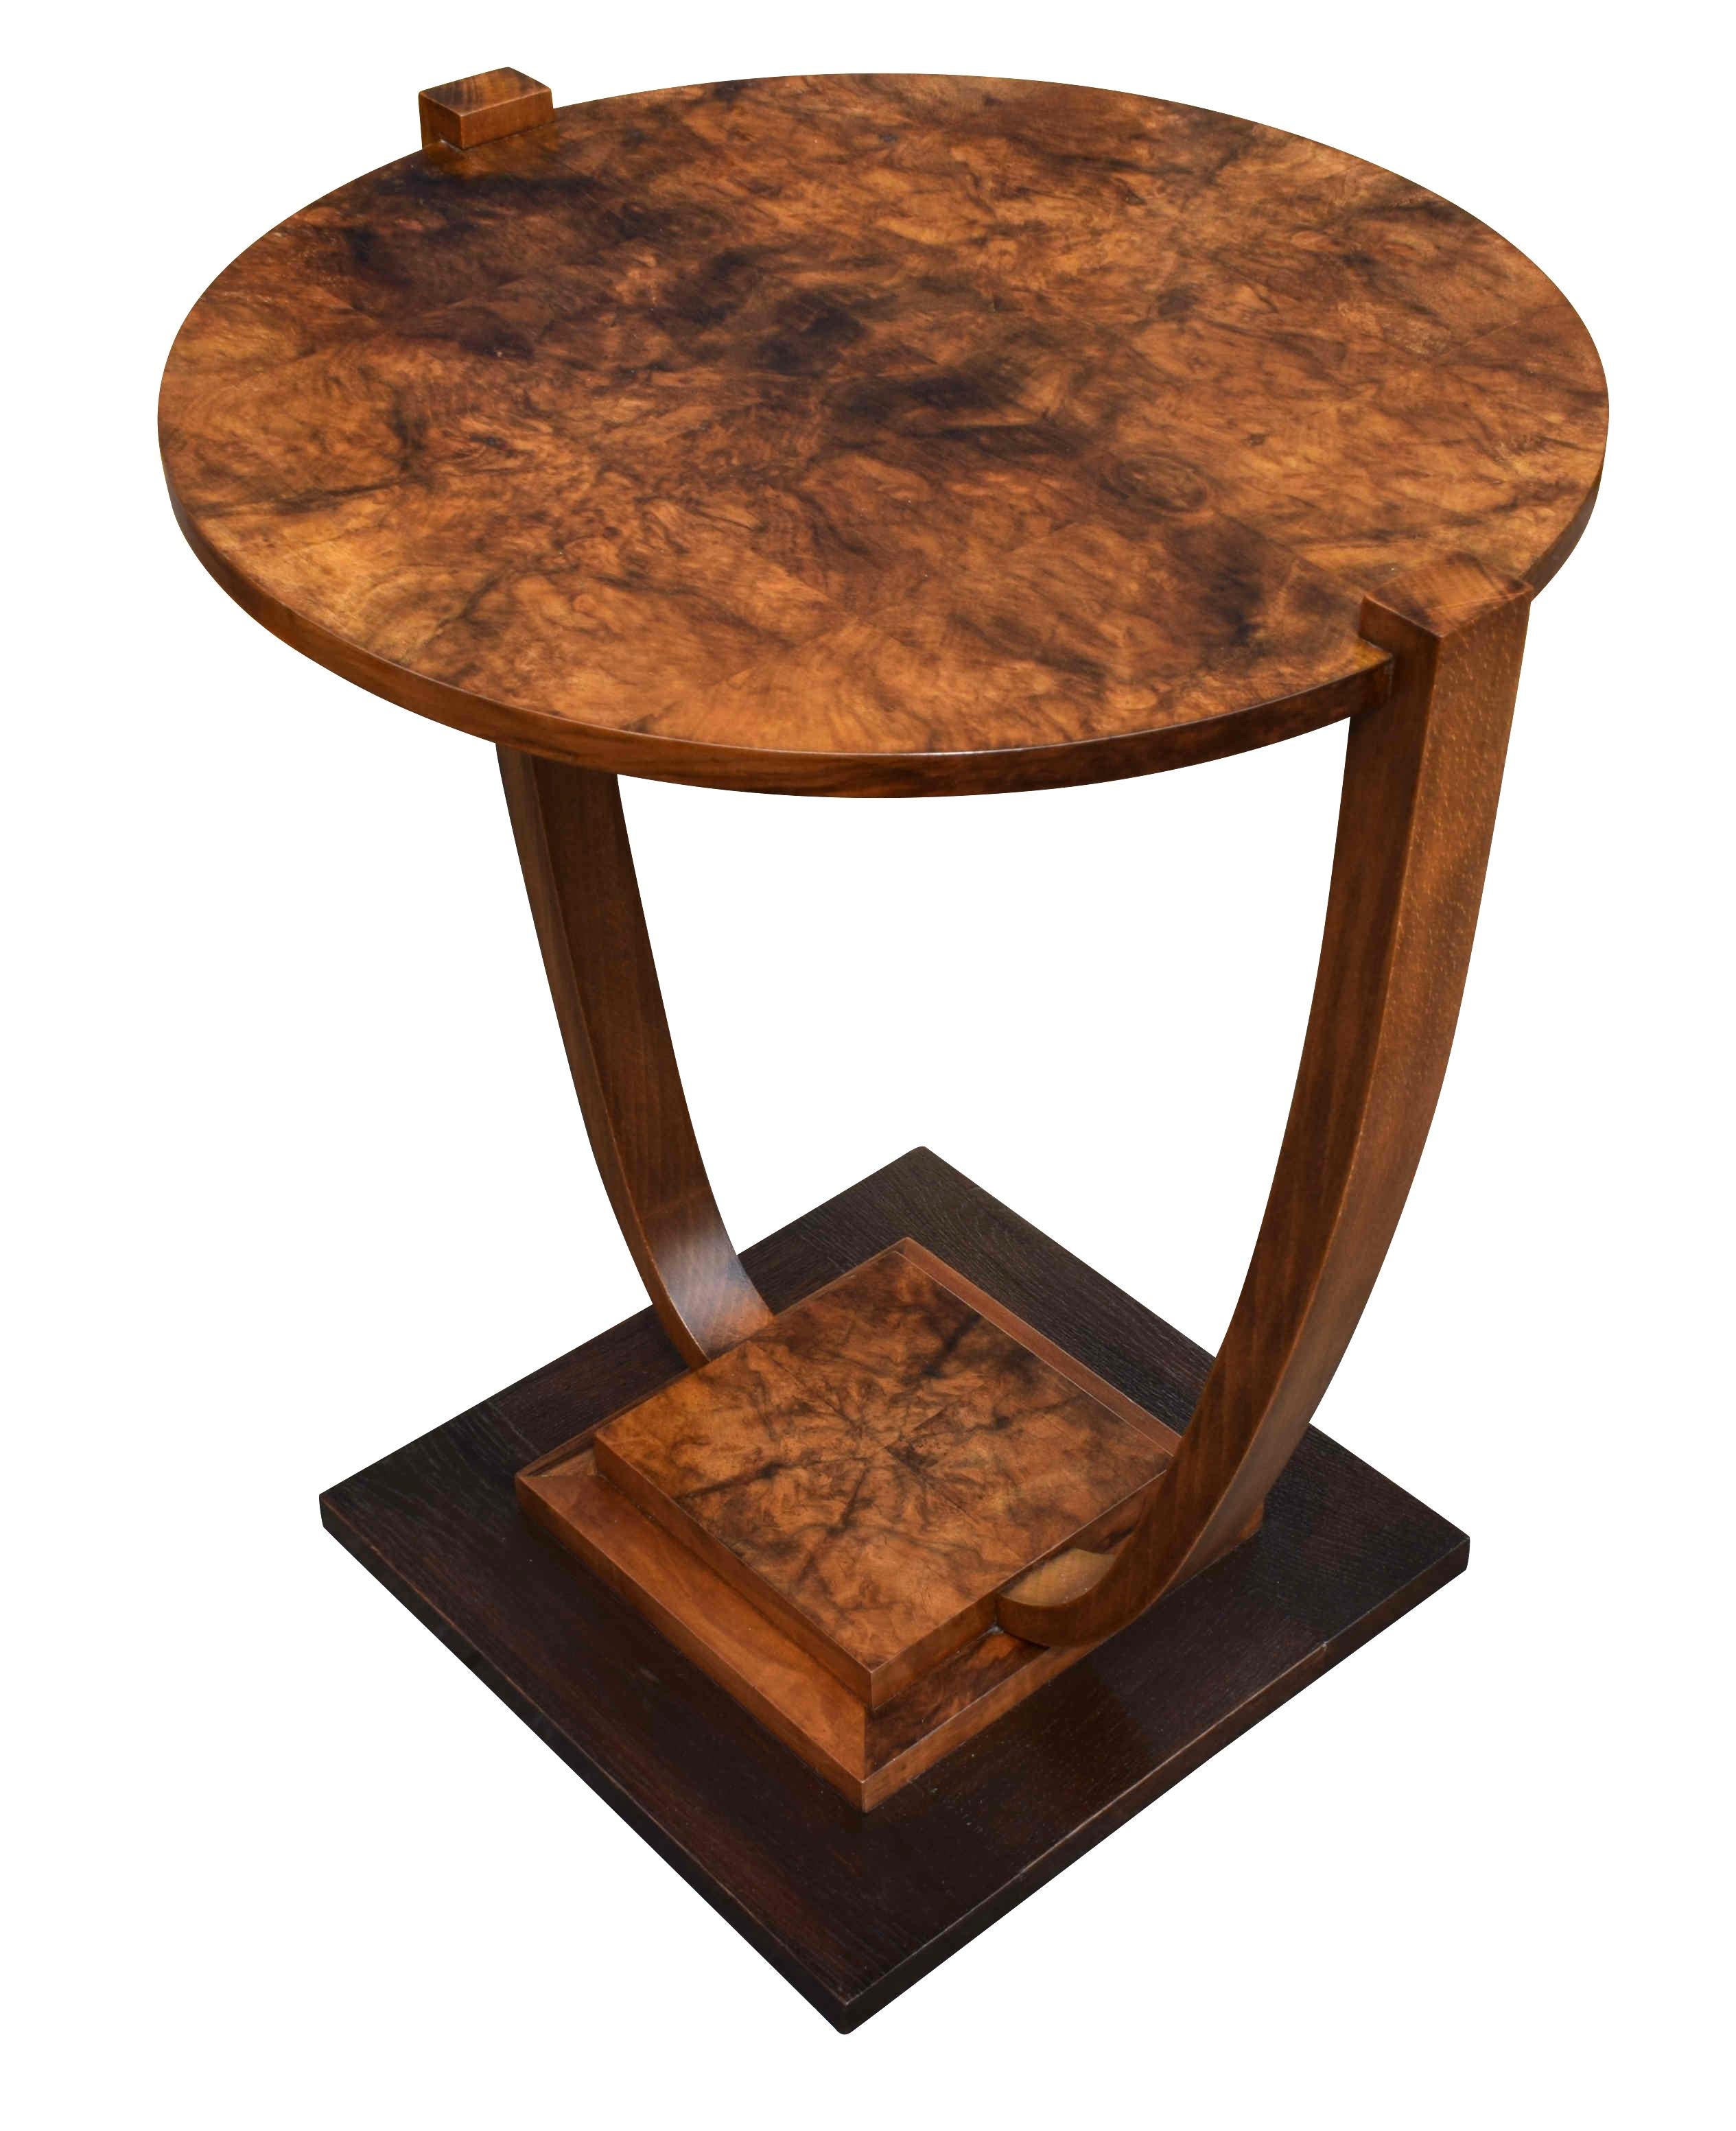 A very stylish 1930s Art Deco French occasional table very much in the style of Leleu. Beautiful walnut veneers and two-tiered with an ebonized stepped base. Typically French in style and would make a great focal point to any room, looks great from